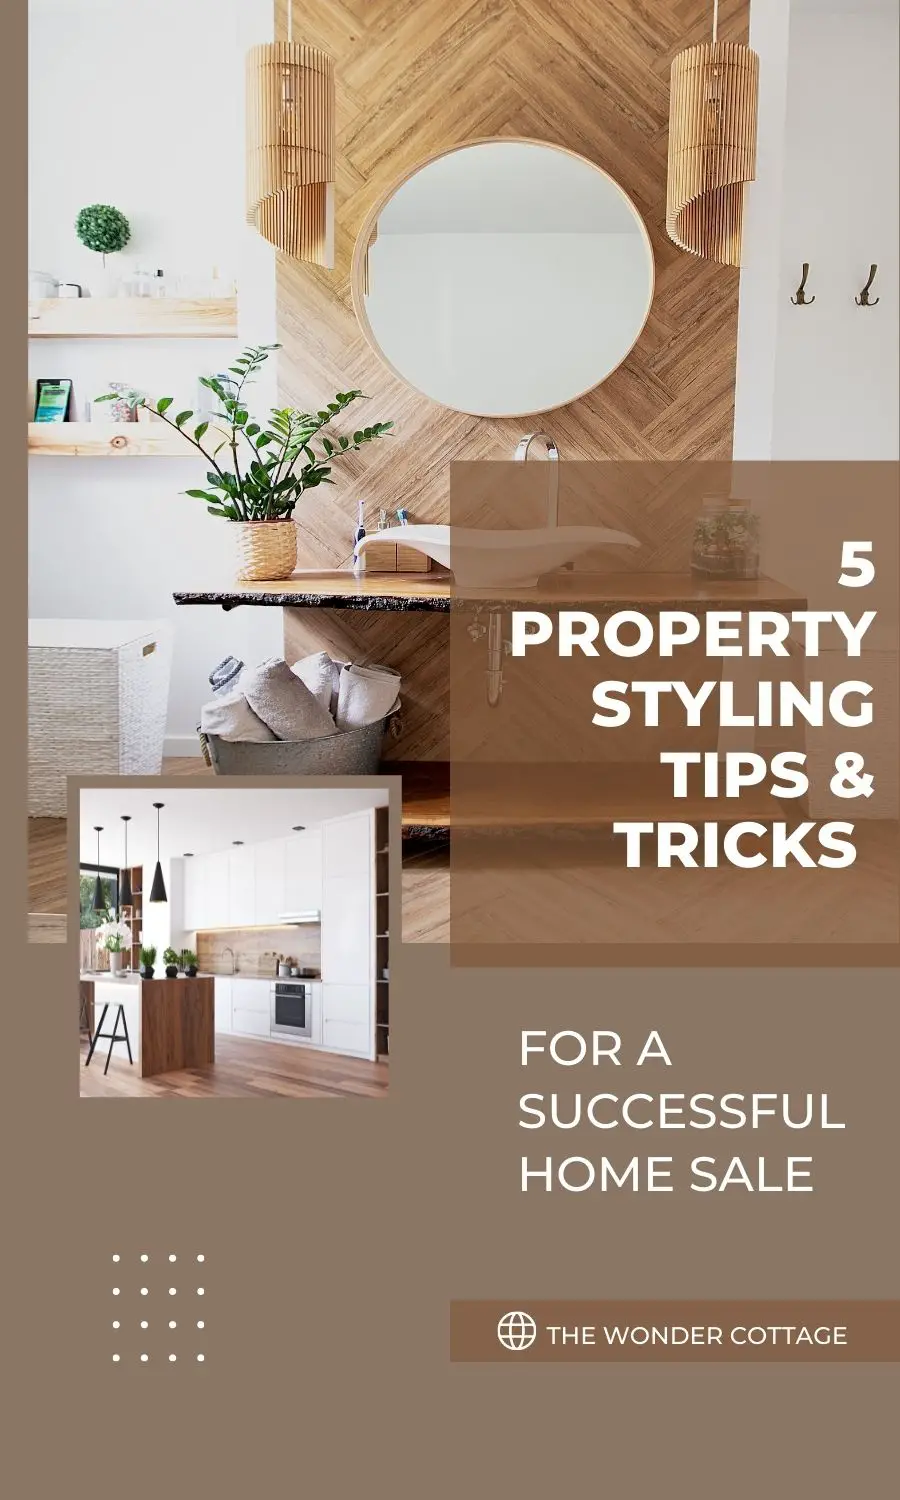 5 Property Styling Tips & Tricks For A Successful Home Sale